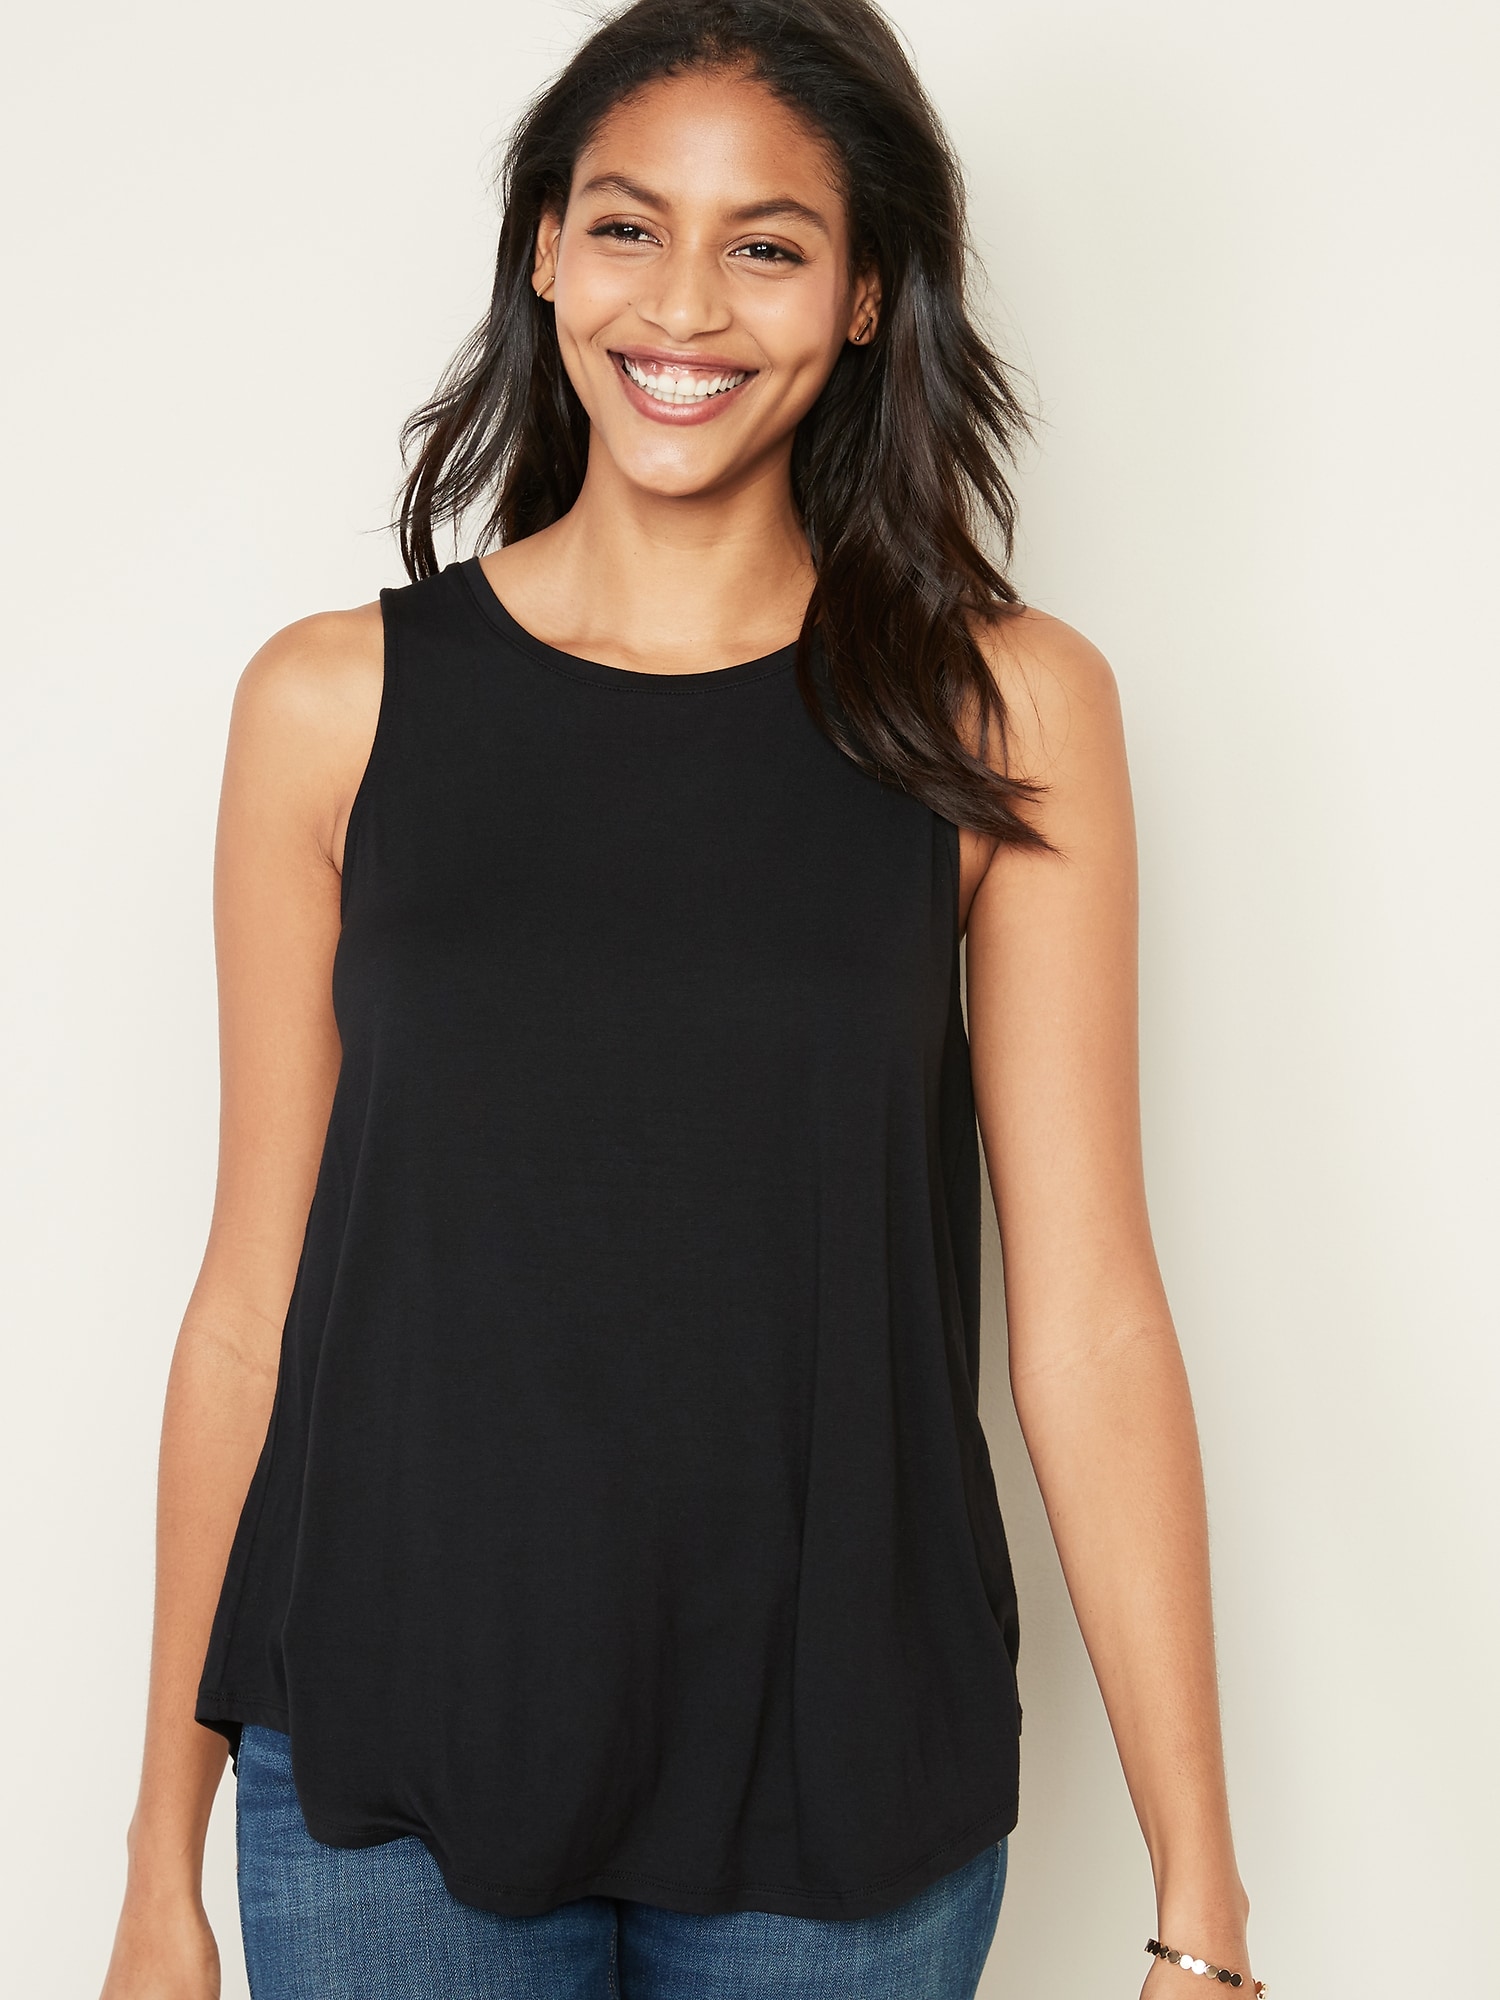 Luxe High-Neck Swing Tank Top for Women